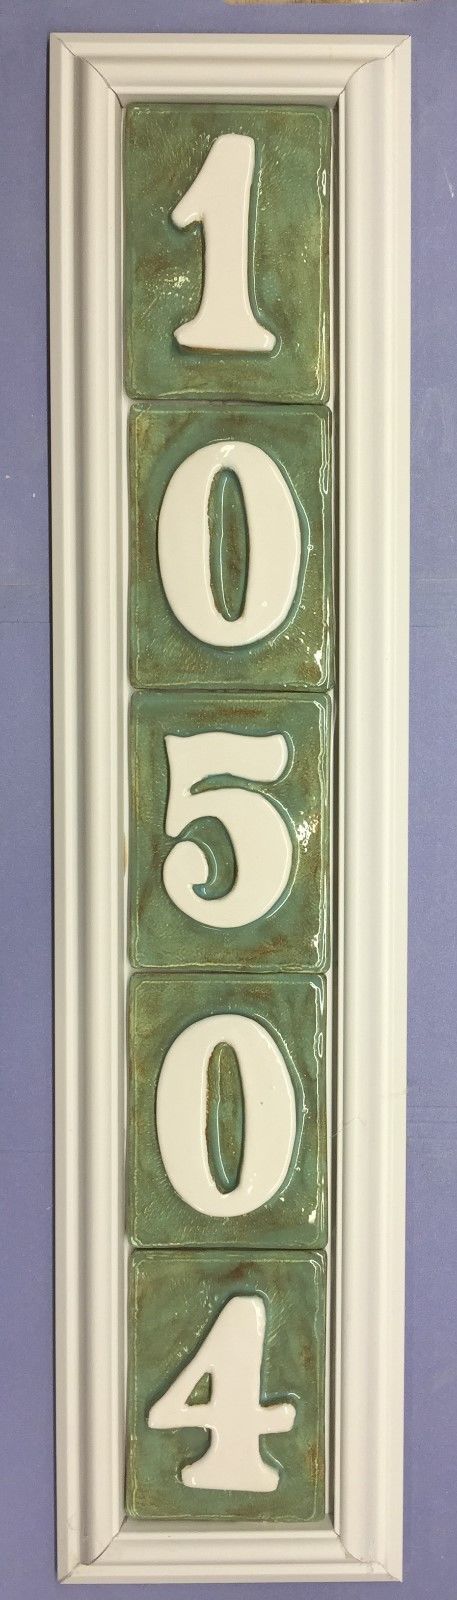 Address numbers for house home, Weatherproof vertical ceramic plaque.Applewood